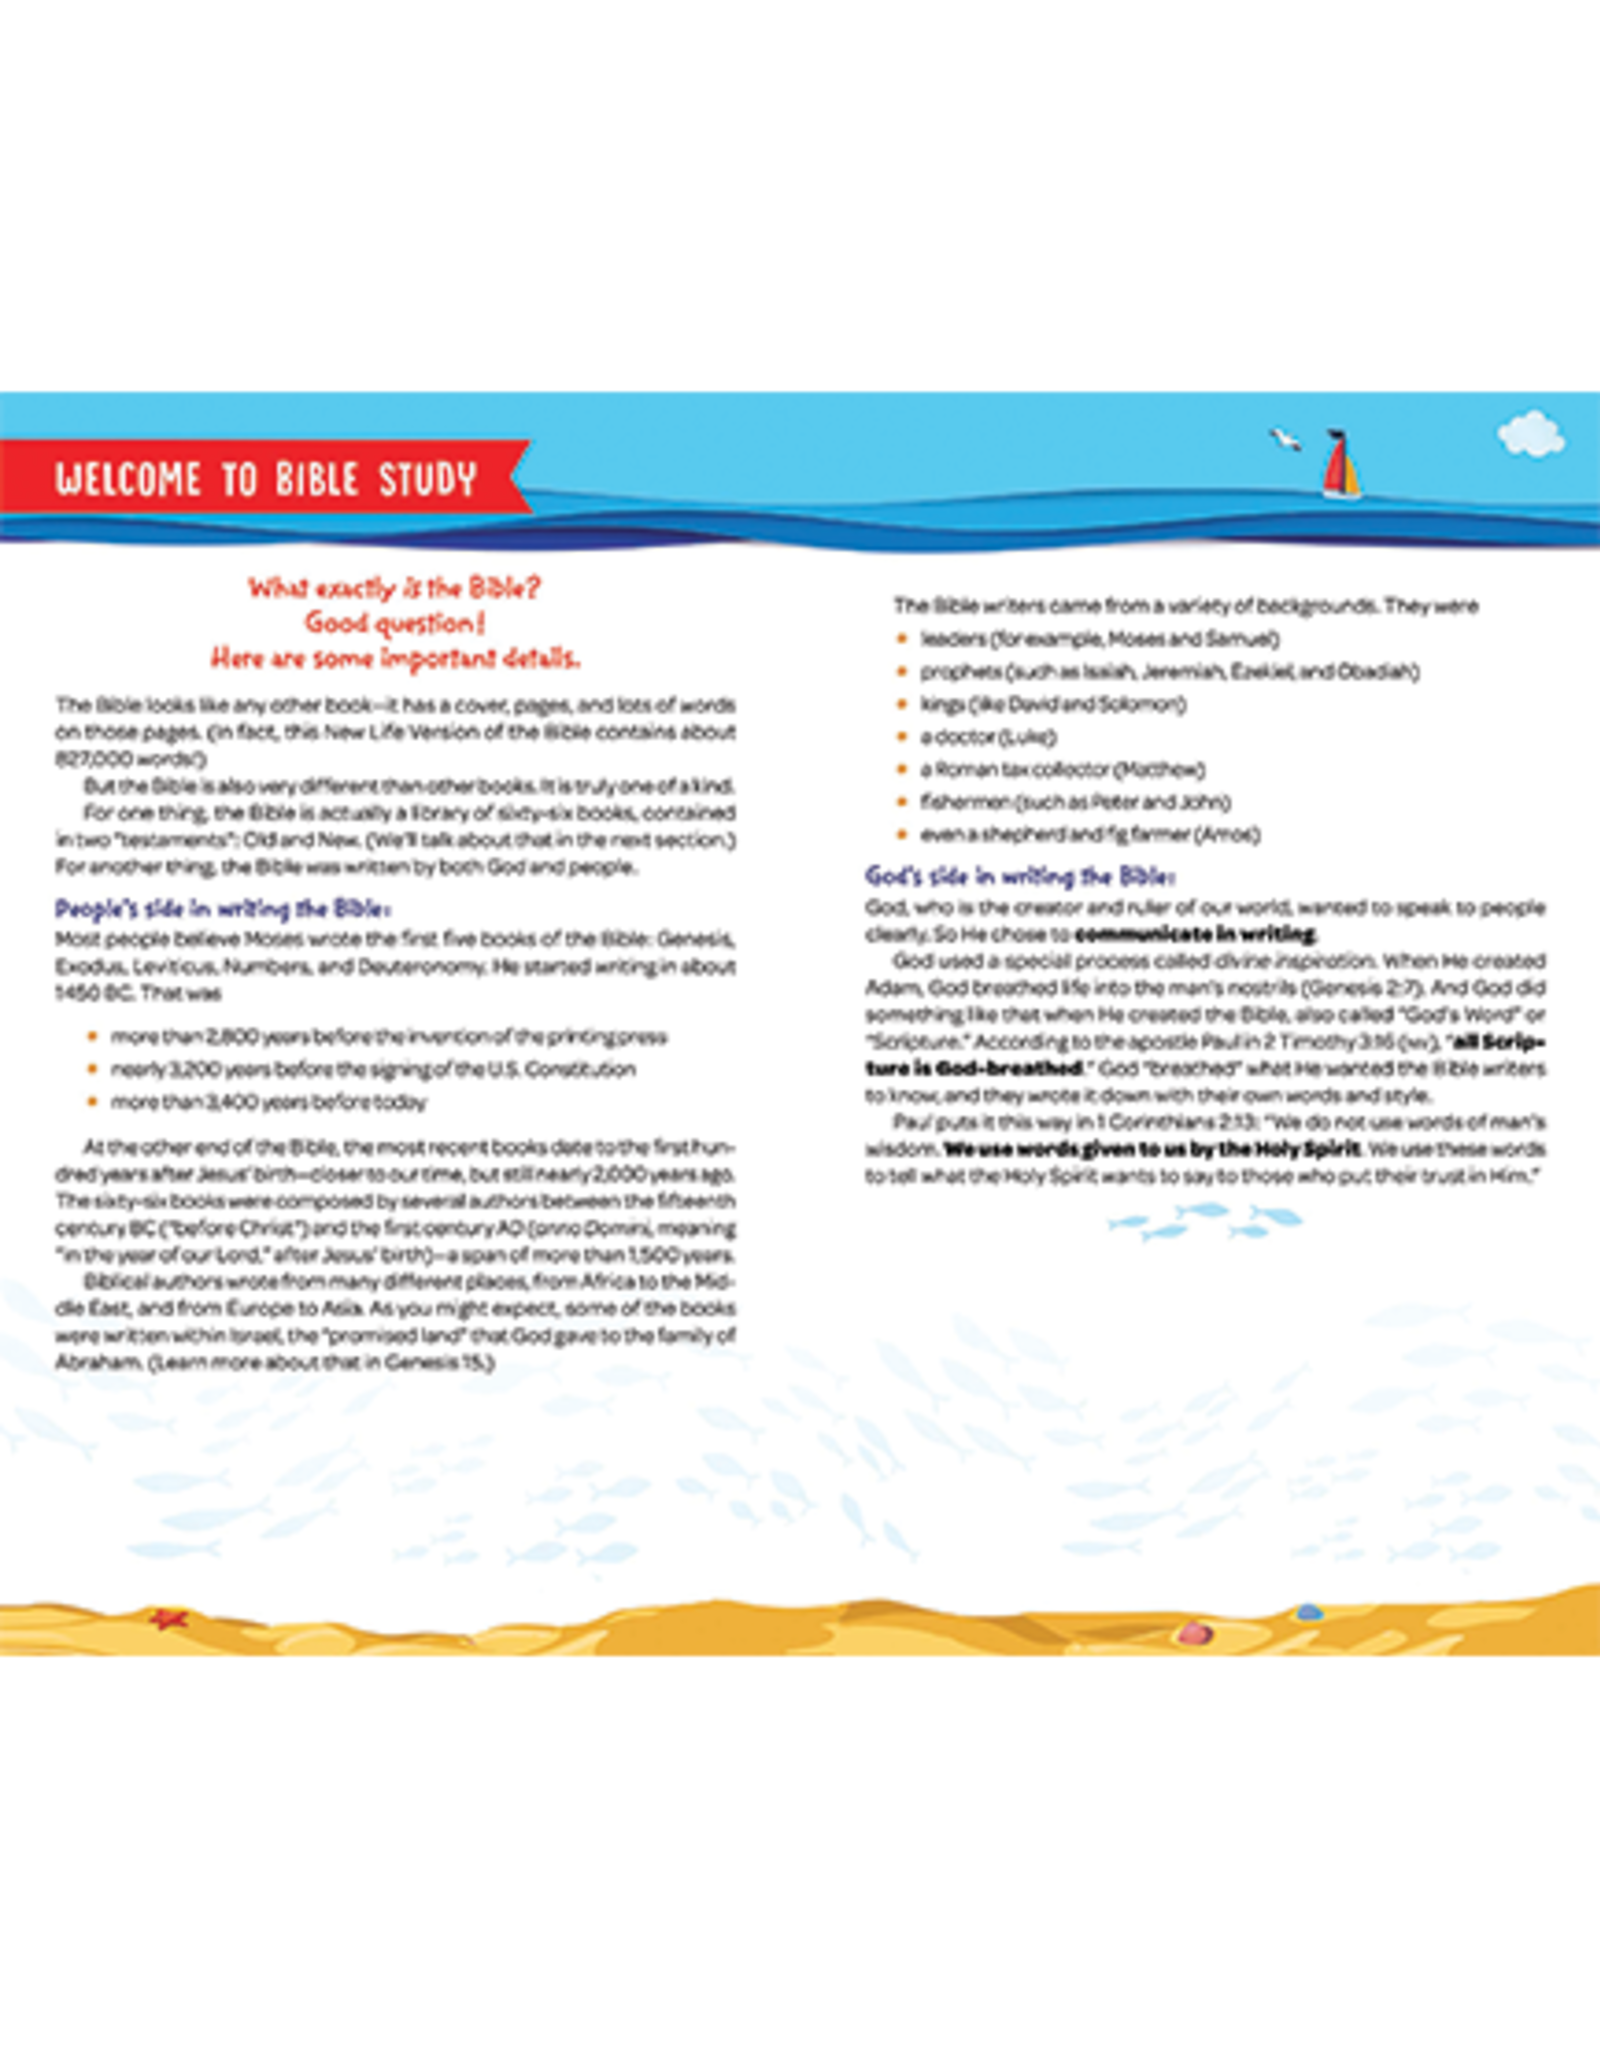 Dive In! Kids' Study Bible